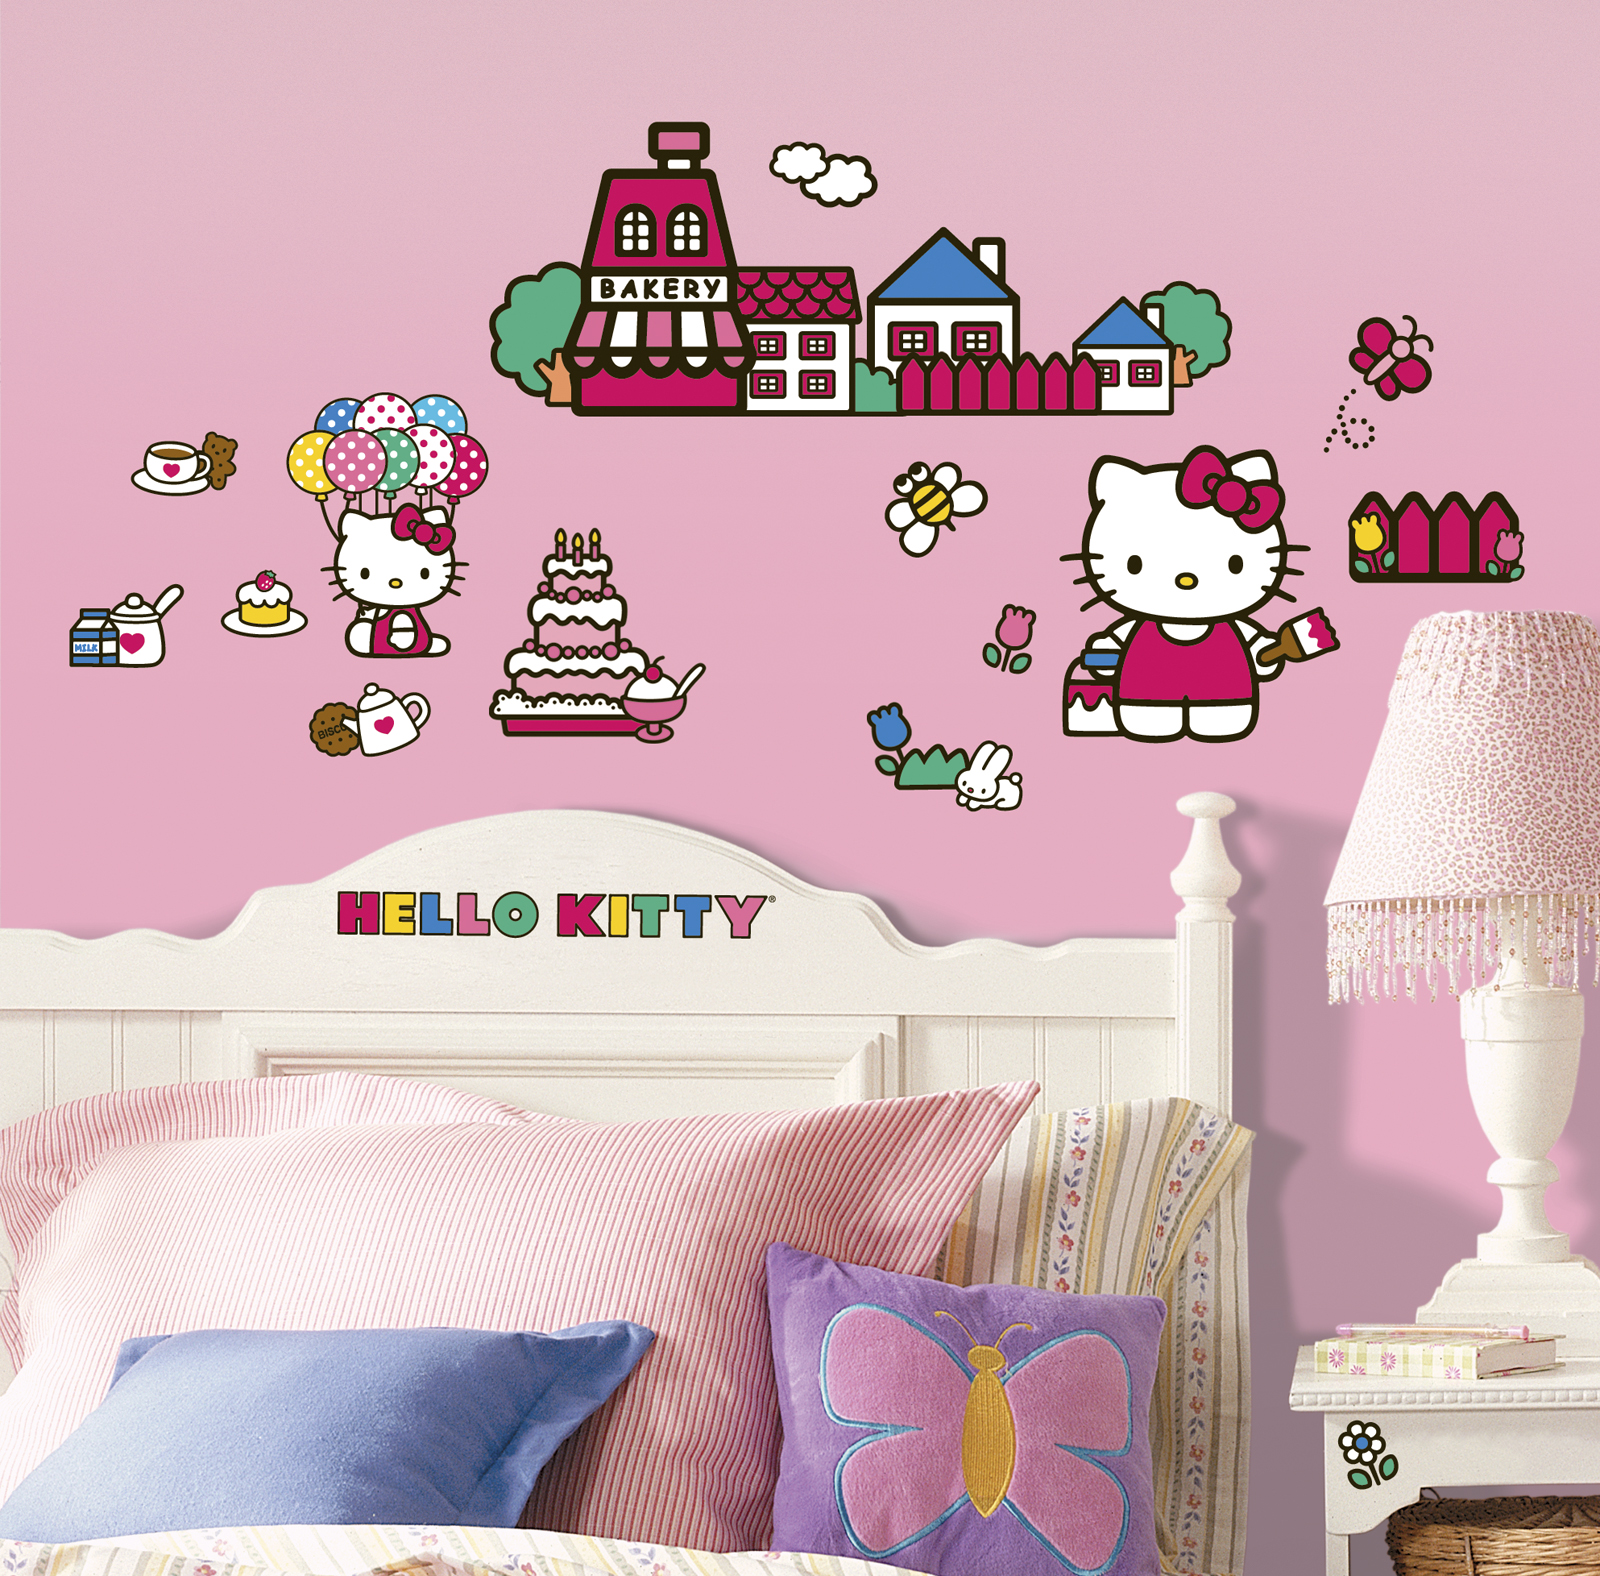 UPC 034878128665 product image for Hello Kitty - The World of Hello Kitty Peel & Stick Wall Decals | upcitemdb.com